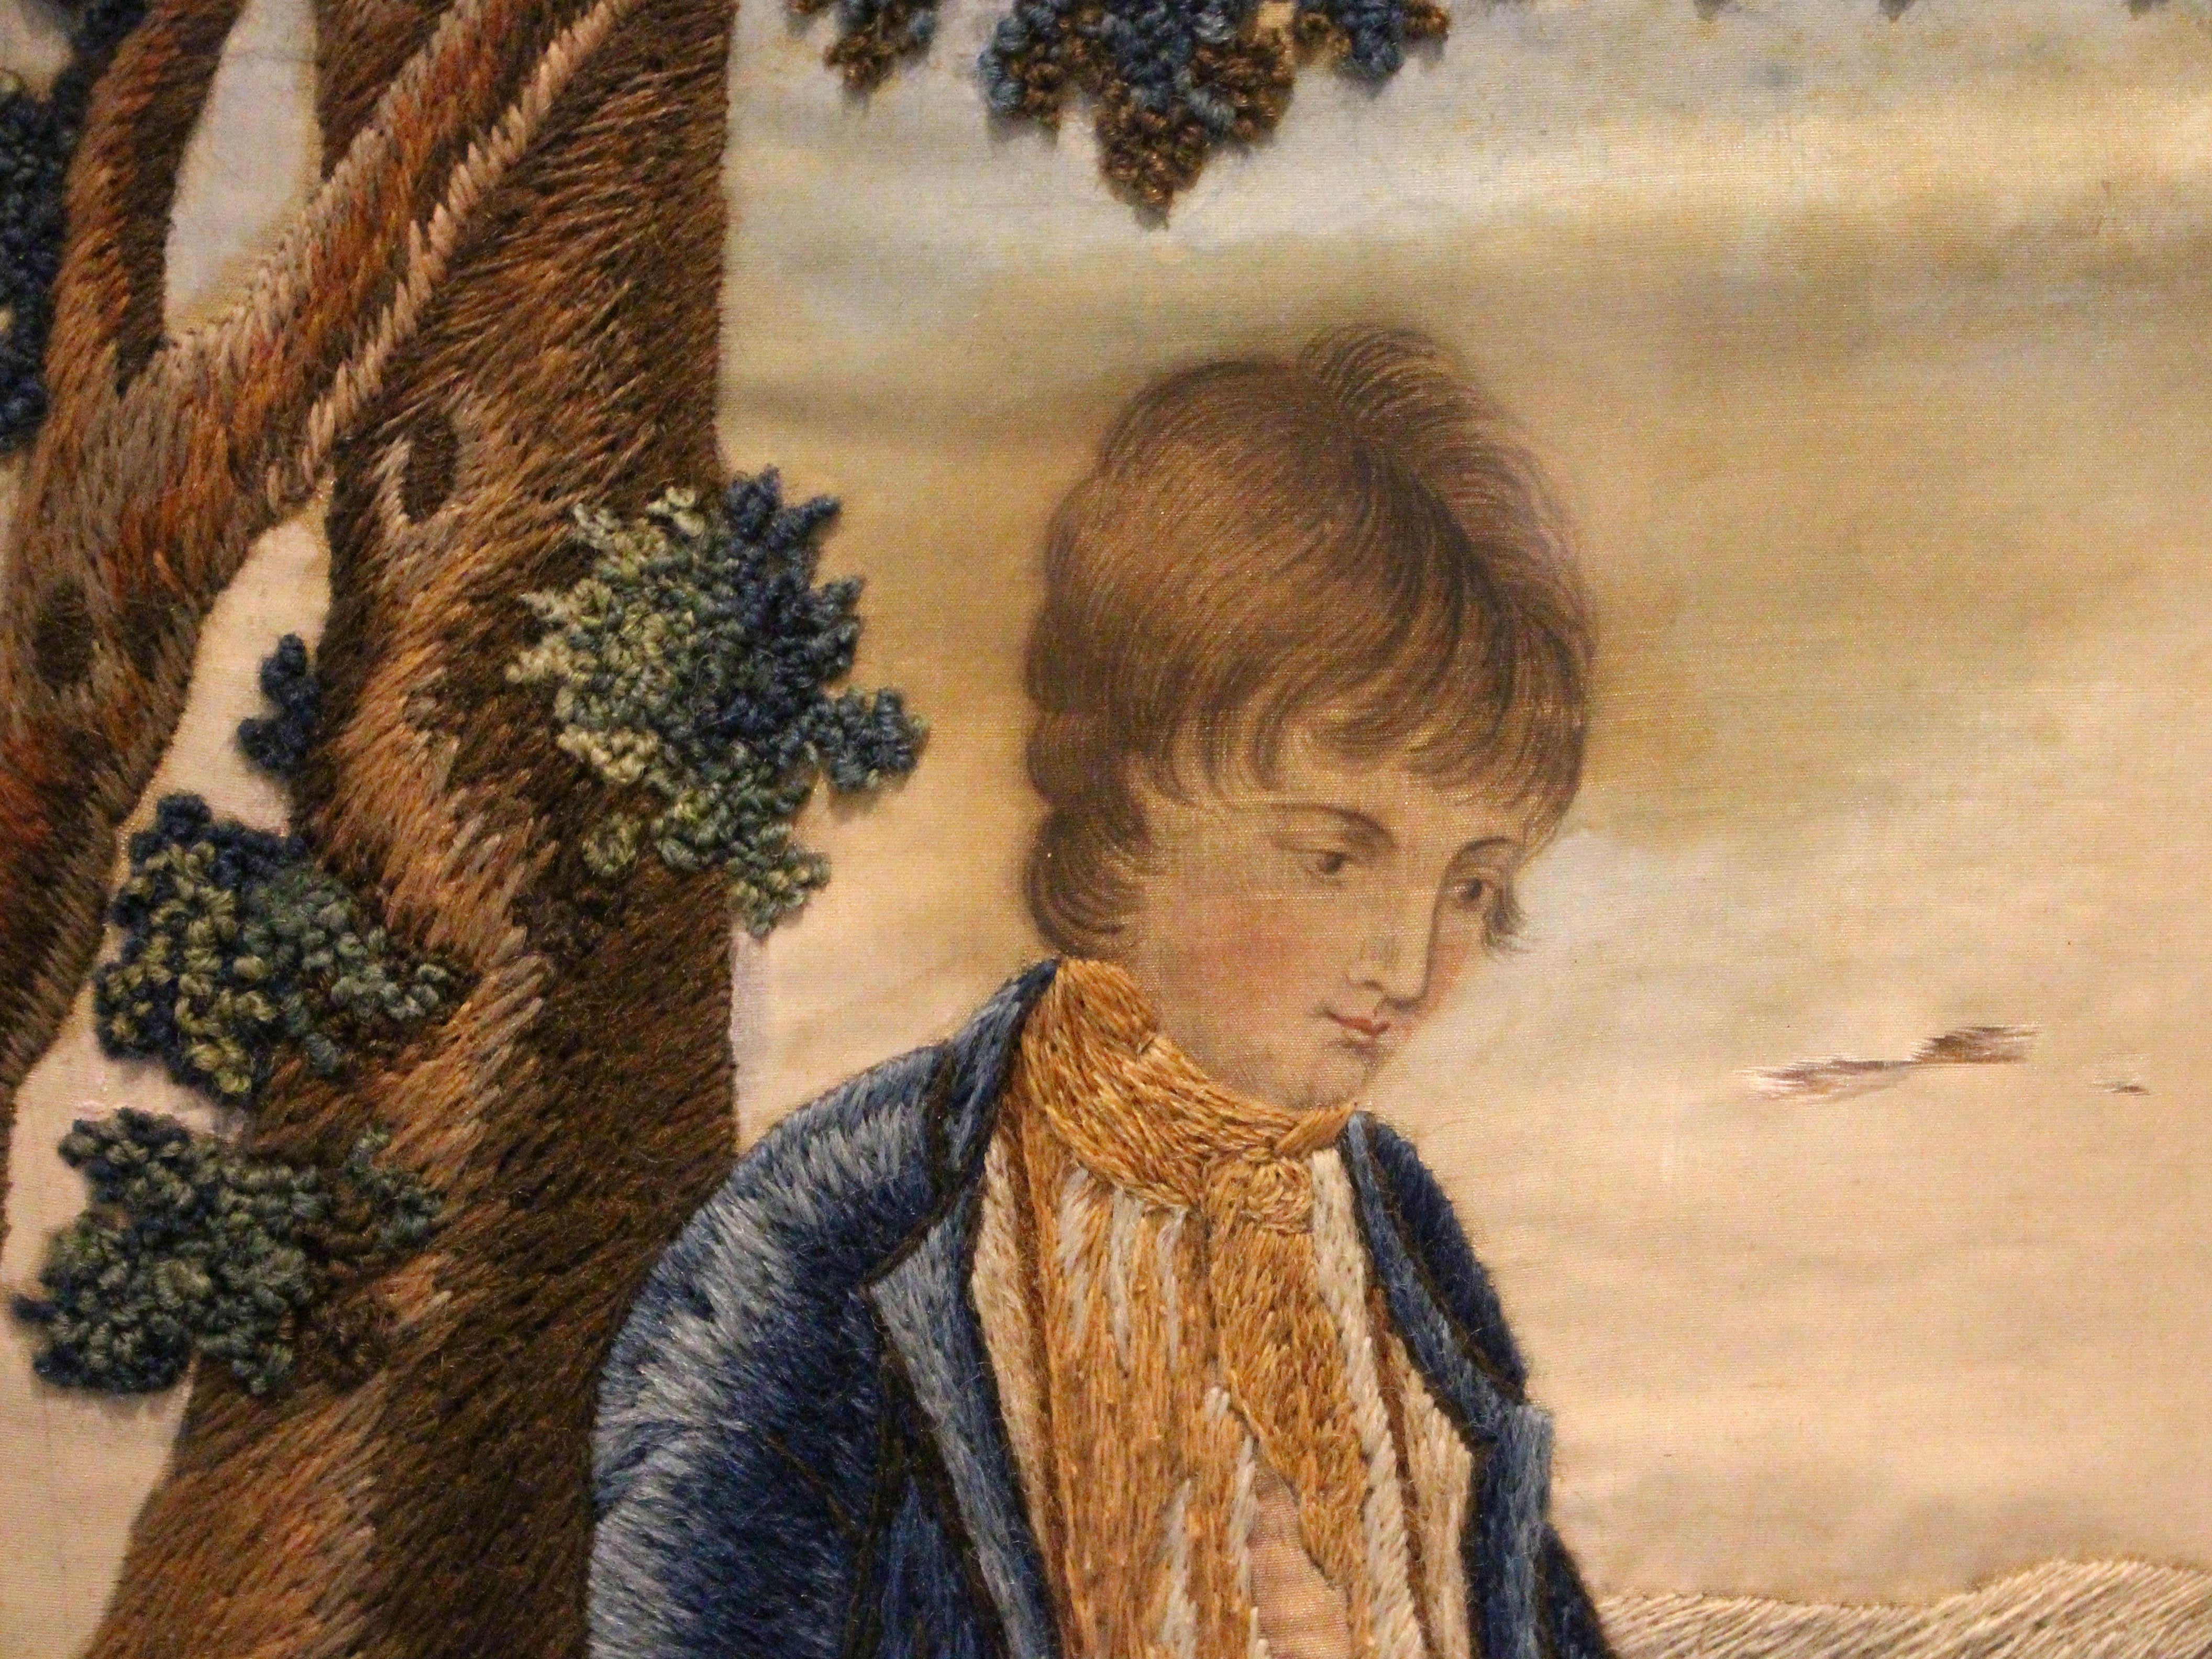 Mid-19th century embroidery work on silk, framed, English. A charming scene of a lad leaning by a tree with his dog hopefully awaiting a treat of the bread the boy is cutting; by a gate to the rolling English countryside. The silk with some